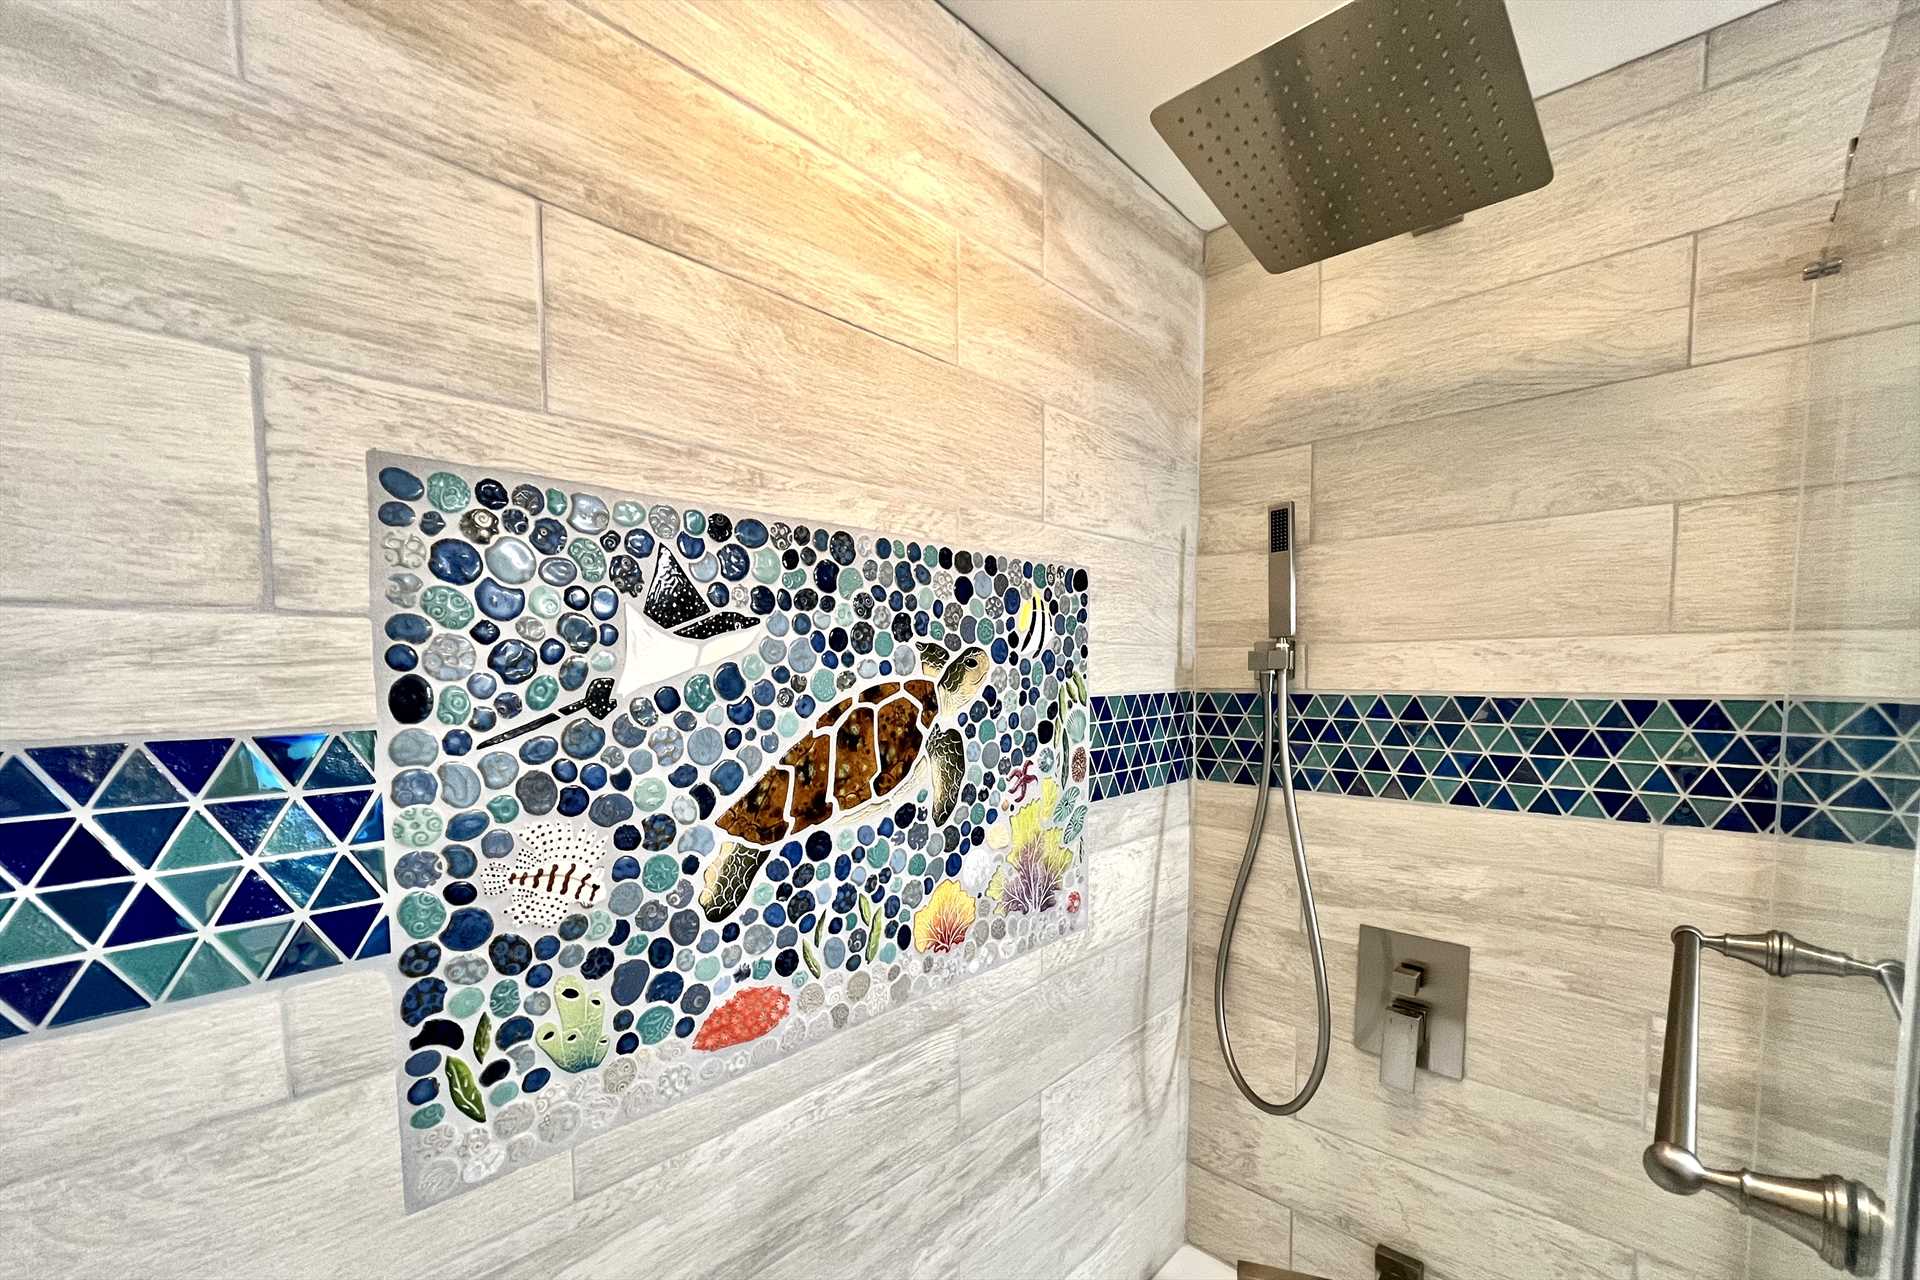 Check out the mosaic and nice shower fixtures.